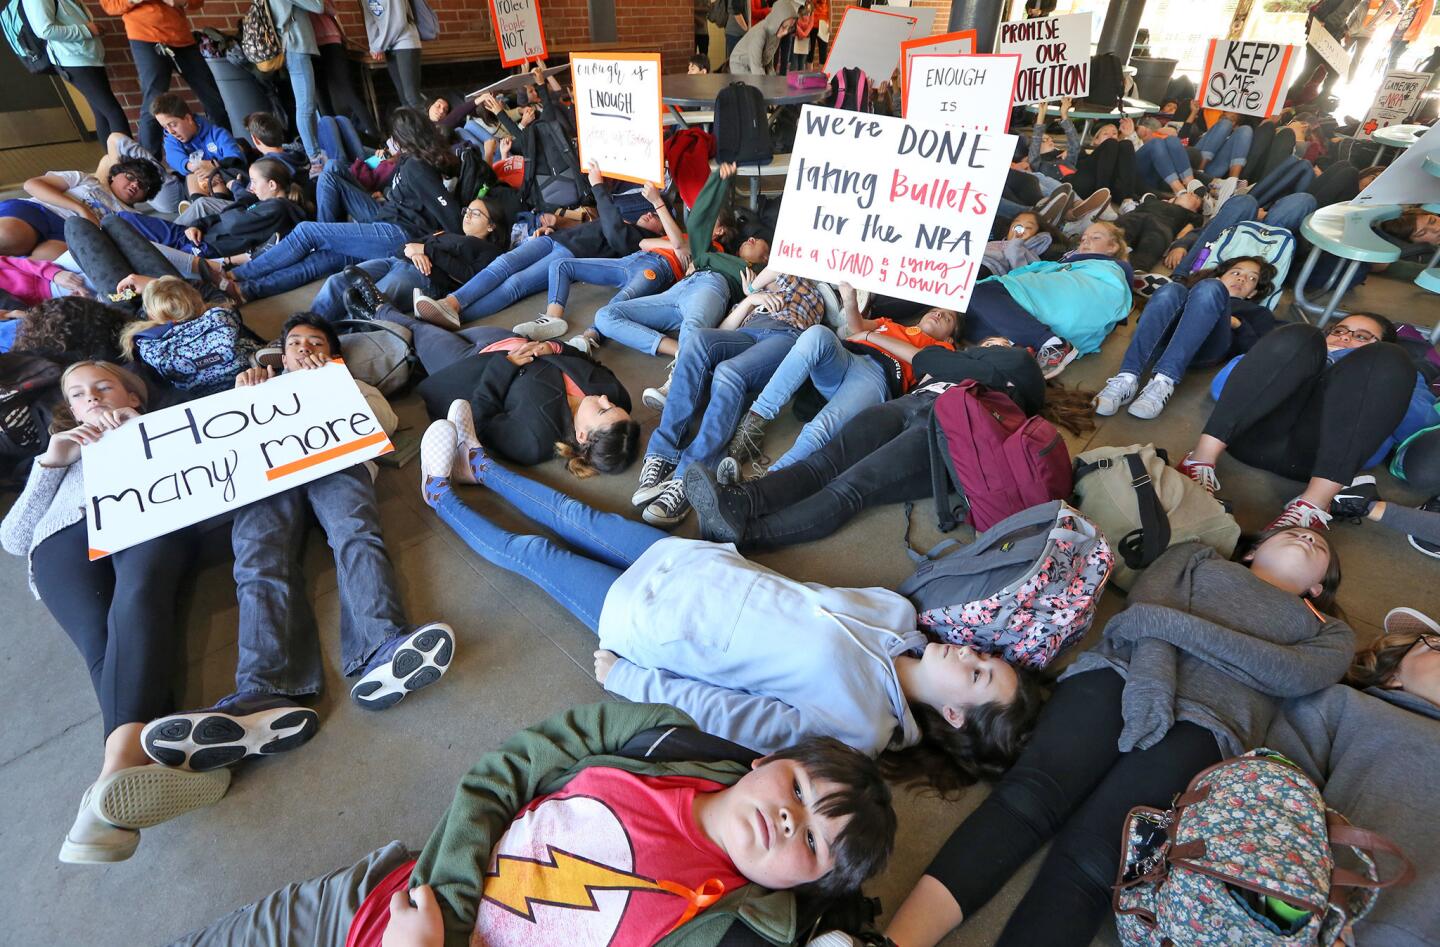 Rosemont Middle School students participate in a a "Die-Inevent" held in conjunction with nationwide school walkouts promoting new gun legislation.